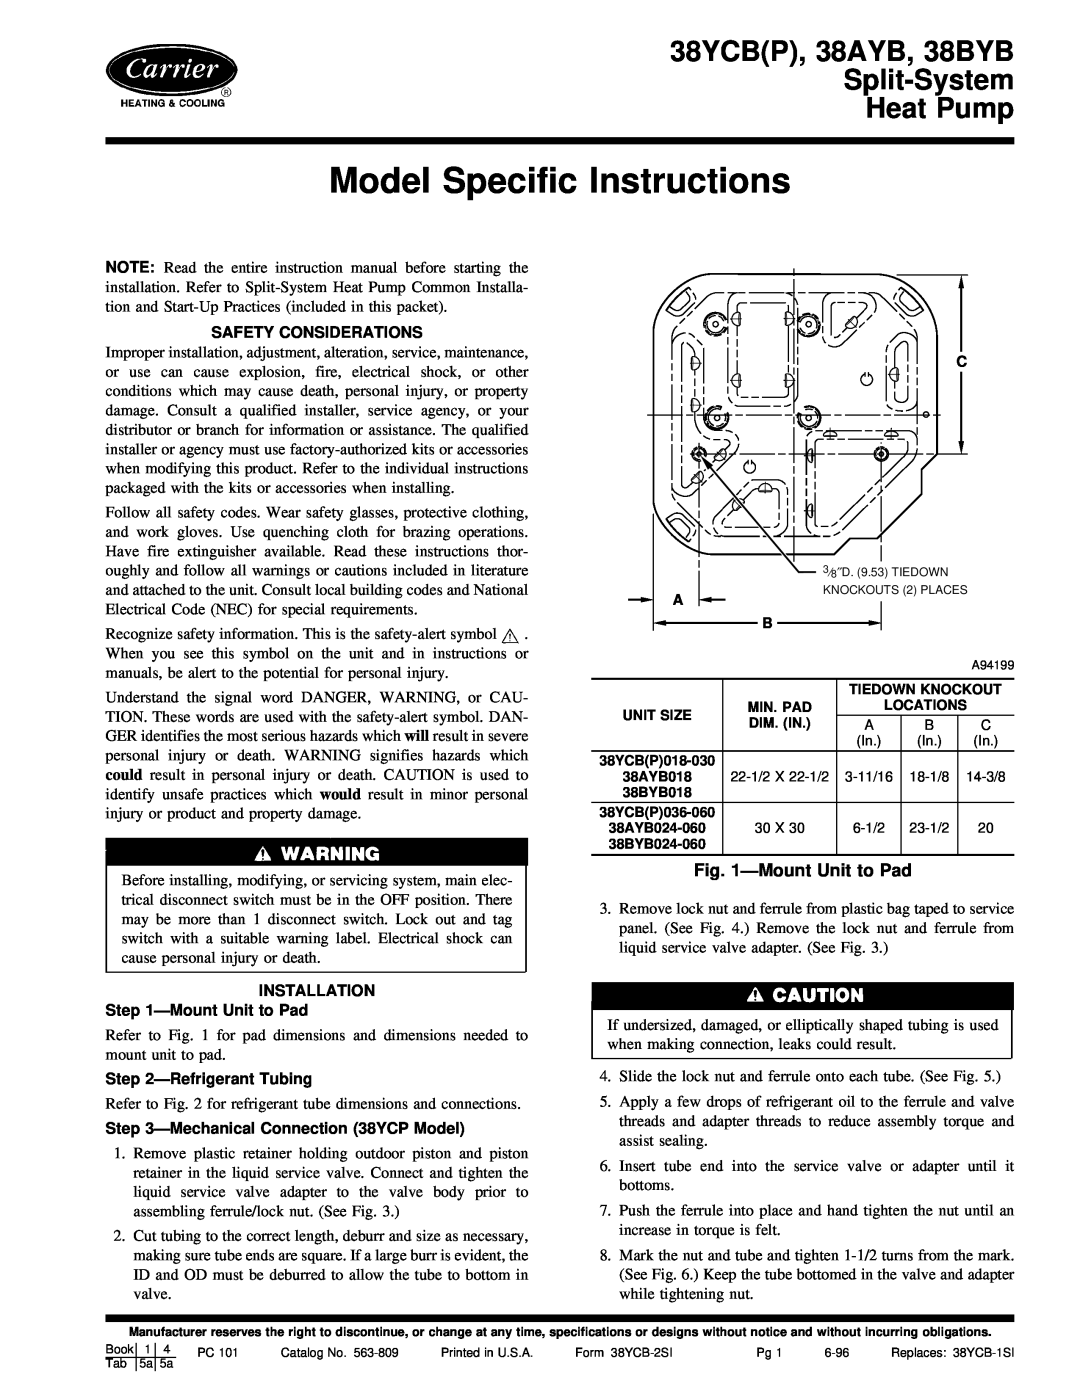 Carrier instruction manual Model Specific Instructions, 38YCBP, 38AYB, 38BYB Split-SystemHeat Pump, ÐMount Unit to Pad 